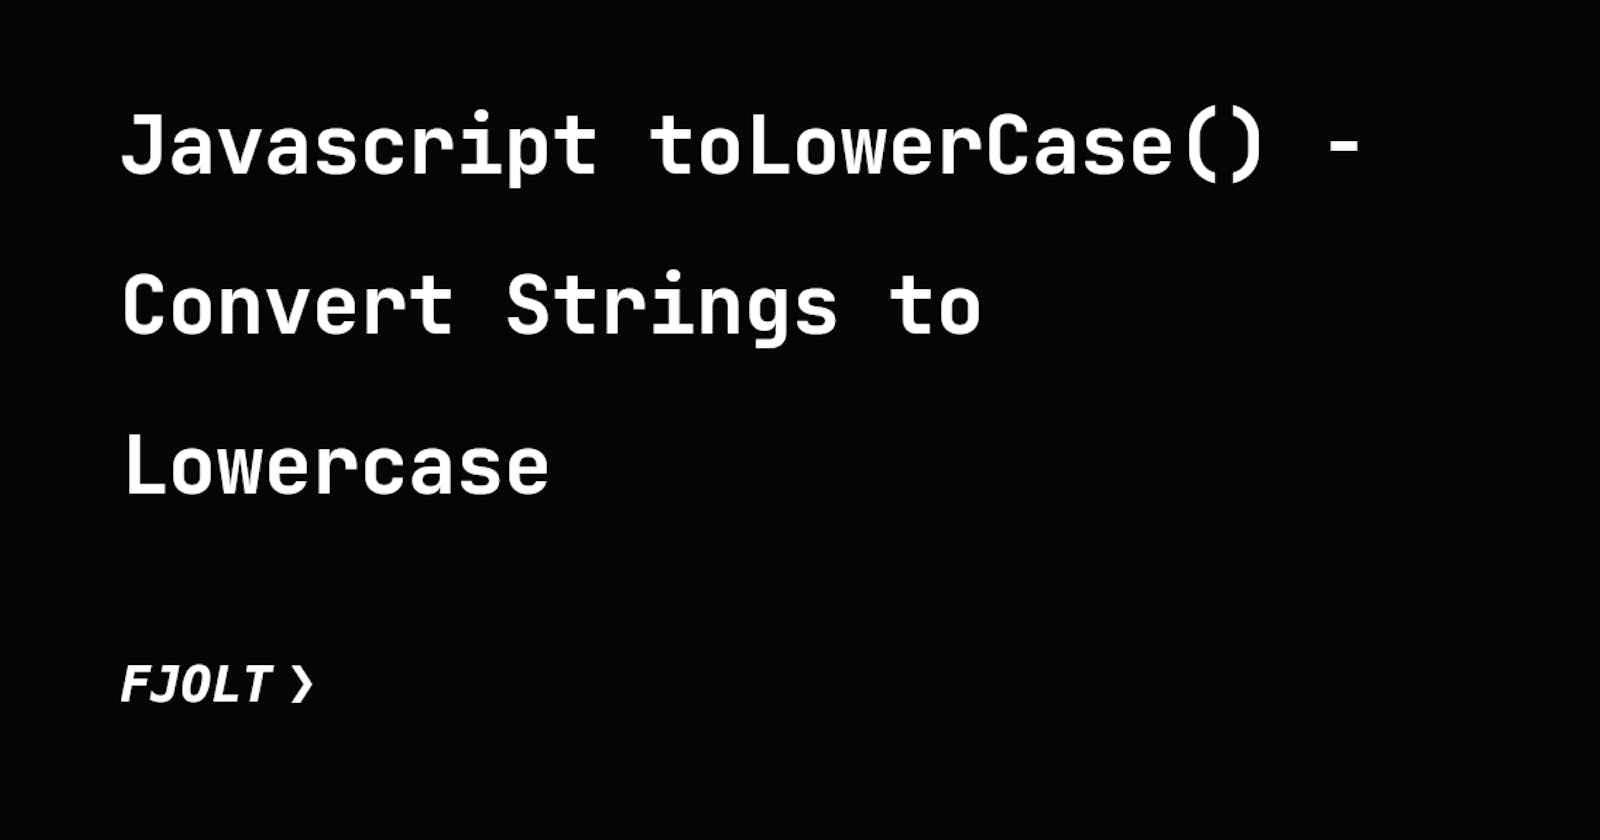 Javascript toLowerCase() - Convert Strings to Lowercase